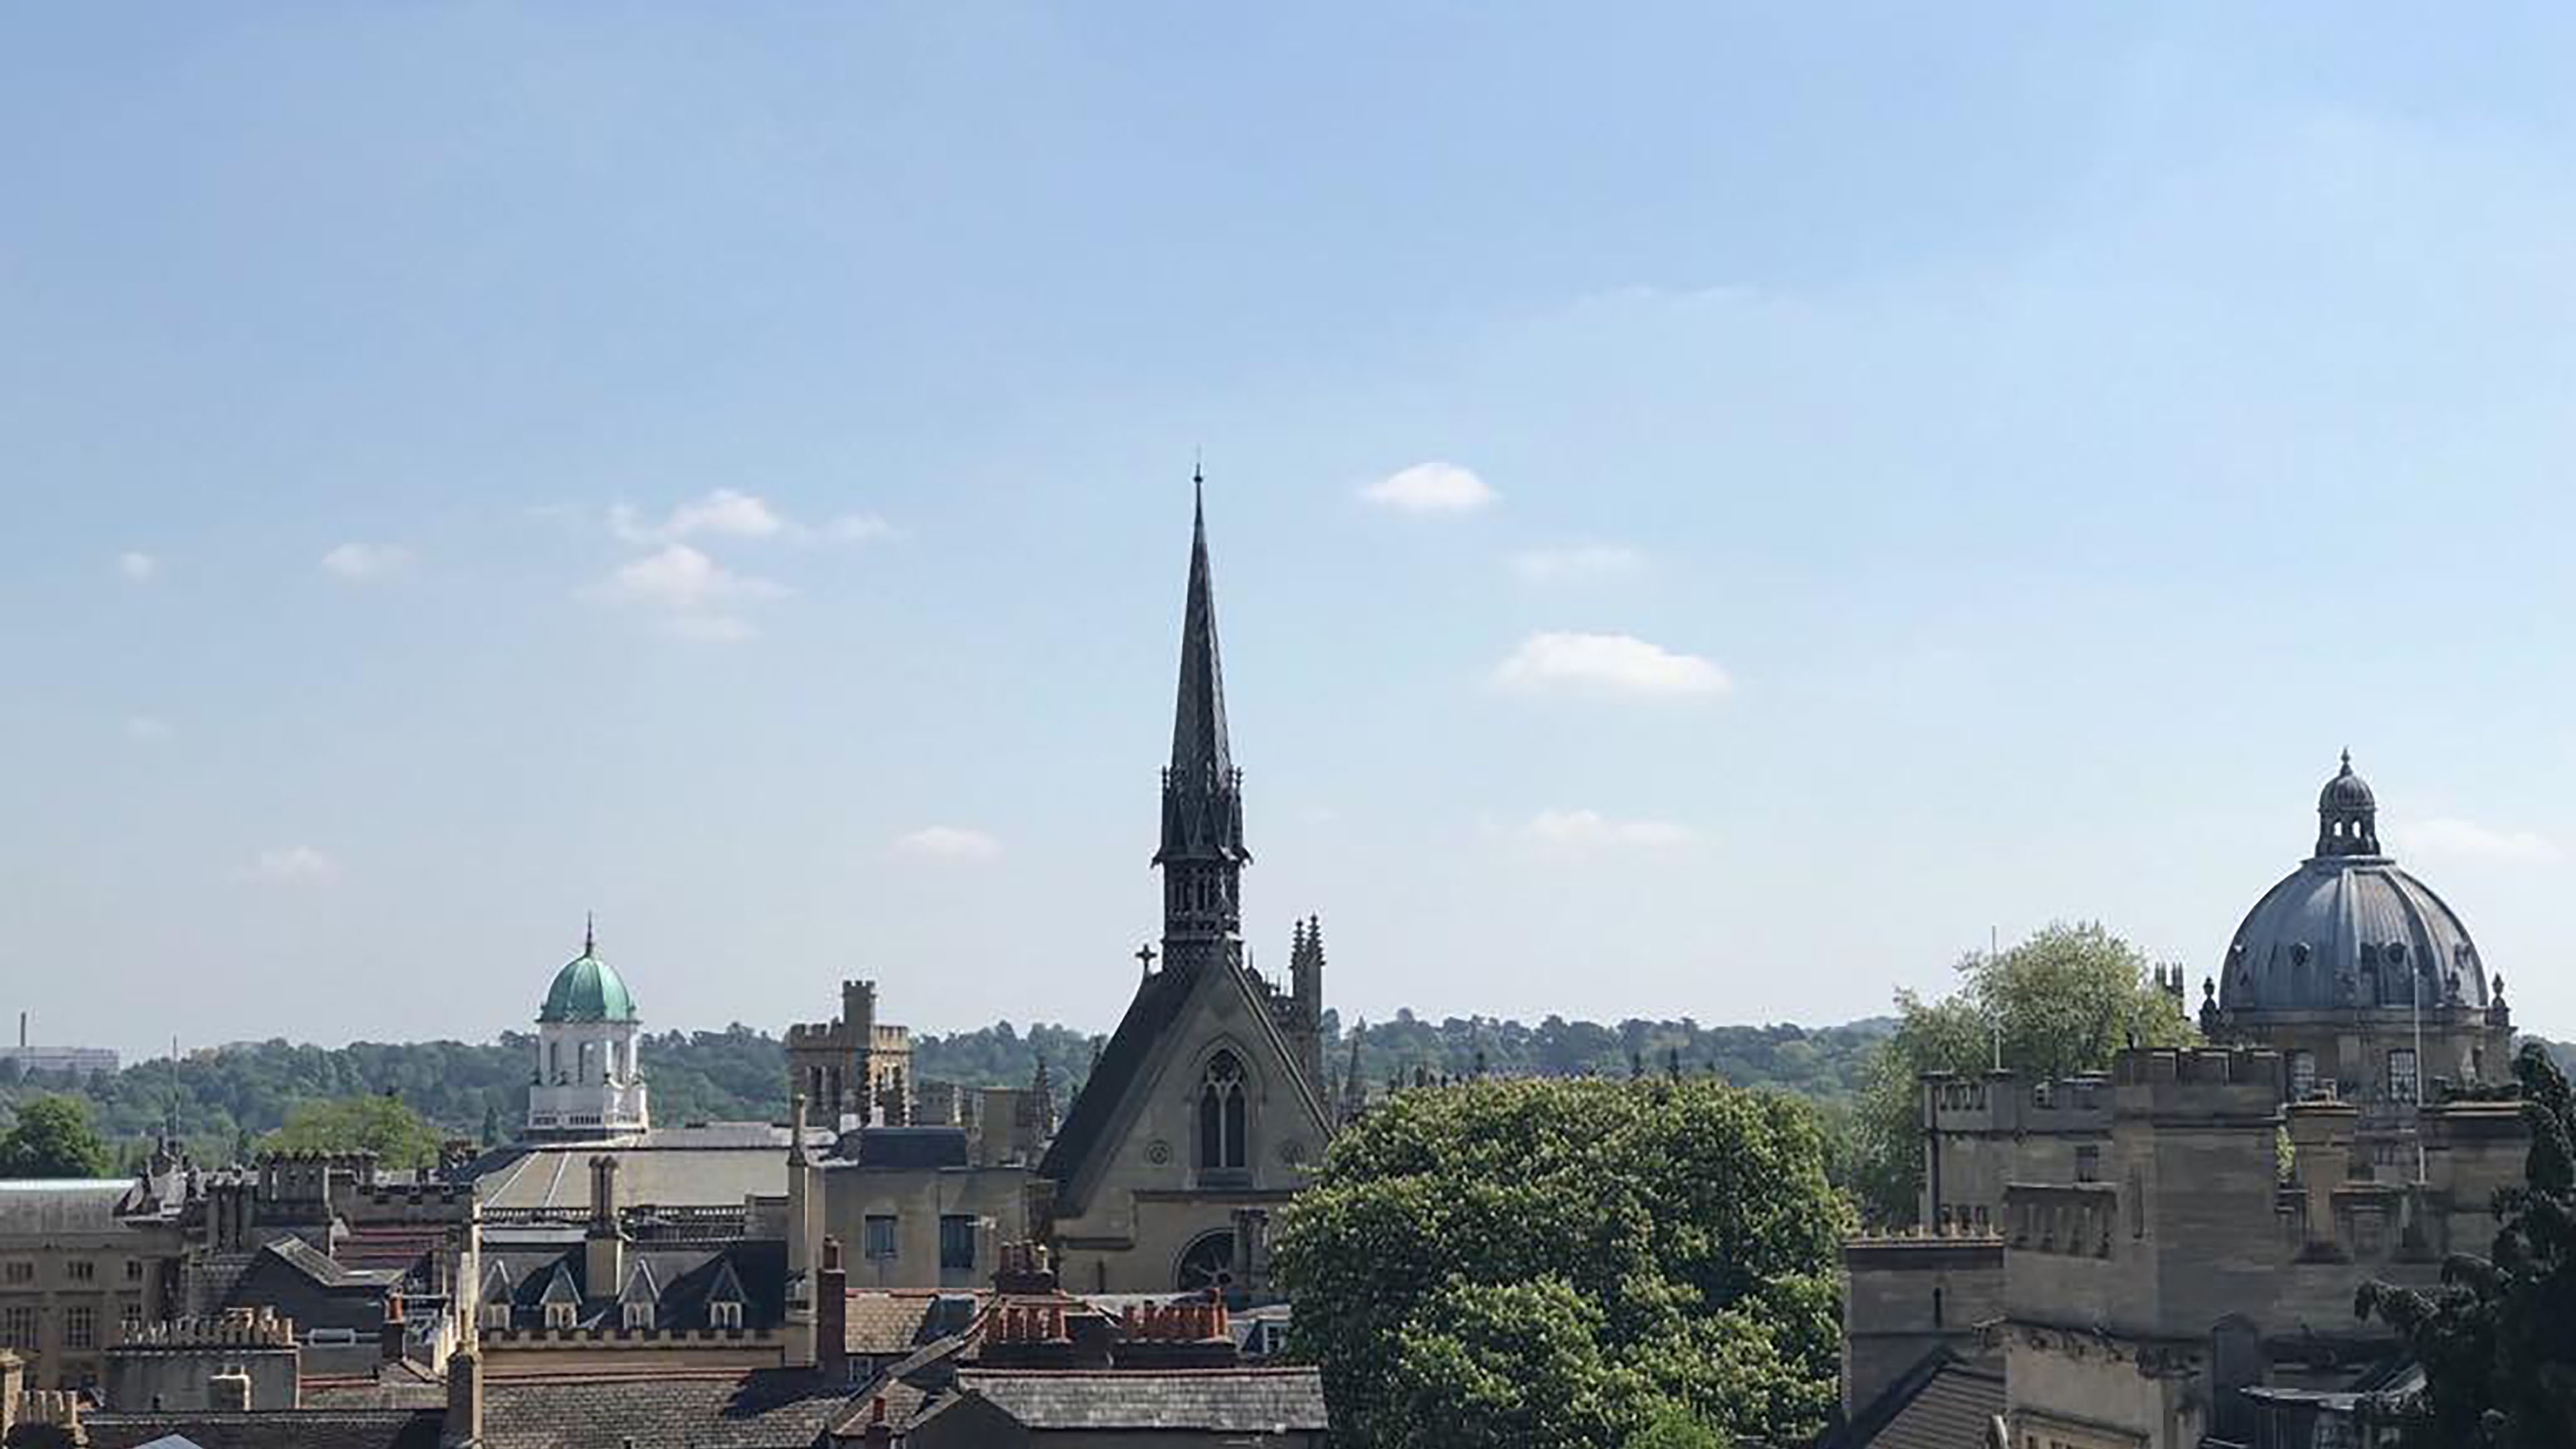 Student Ramya Krishna '20 shares a photo of Oxford from above.